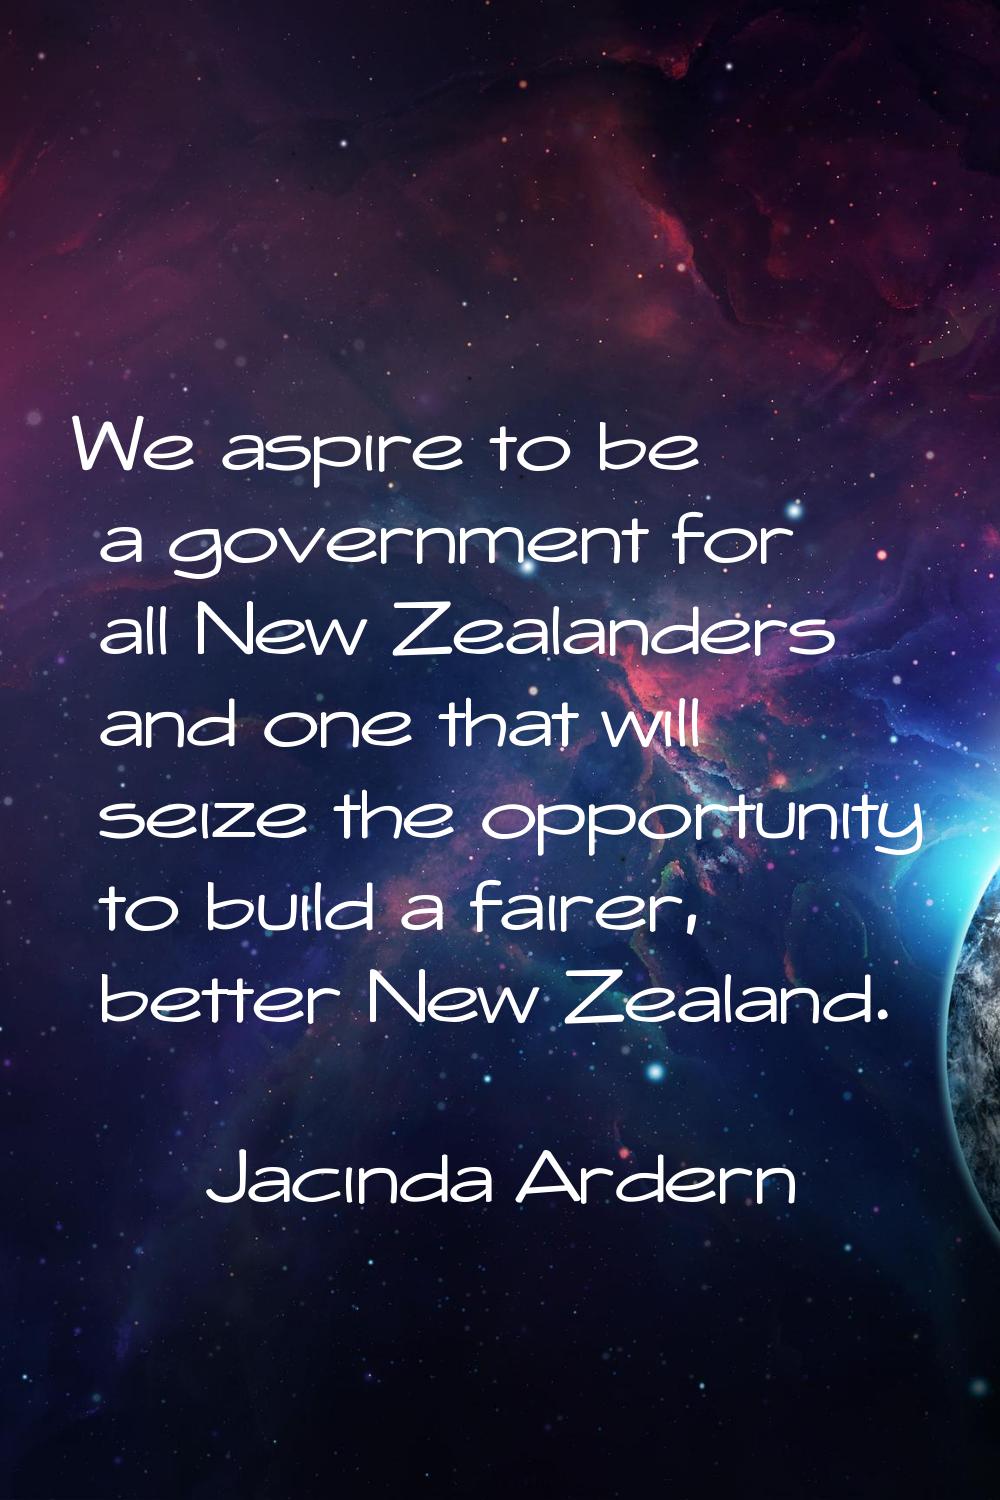 We aspire to be a government for all New Zealanders and one that will seize the opportunity to buil